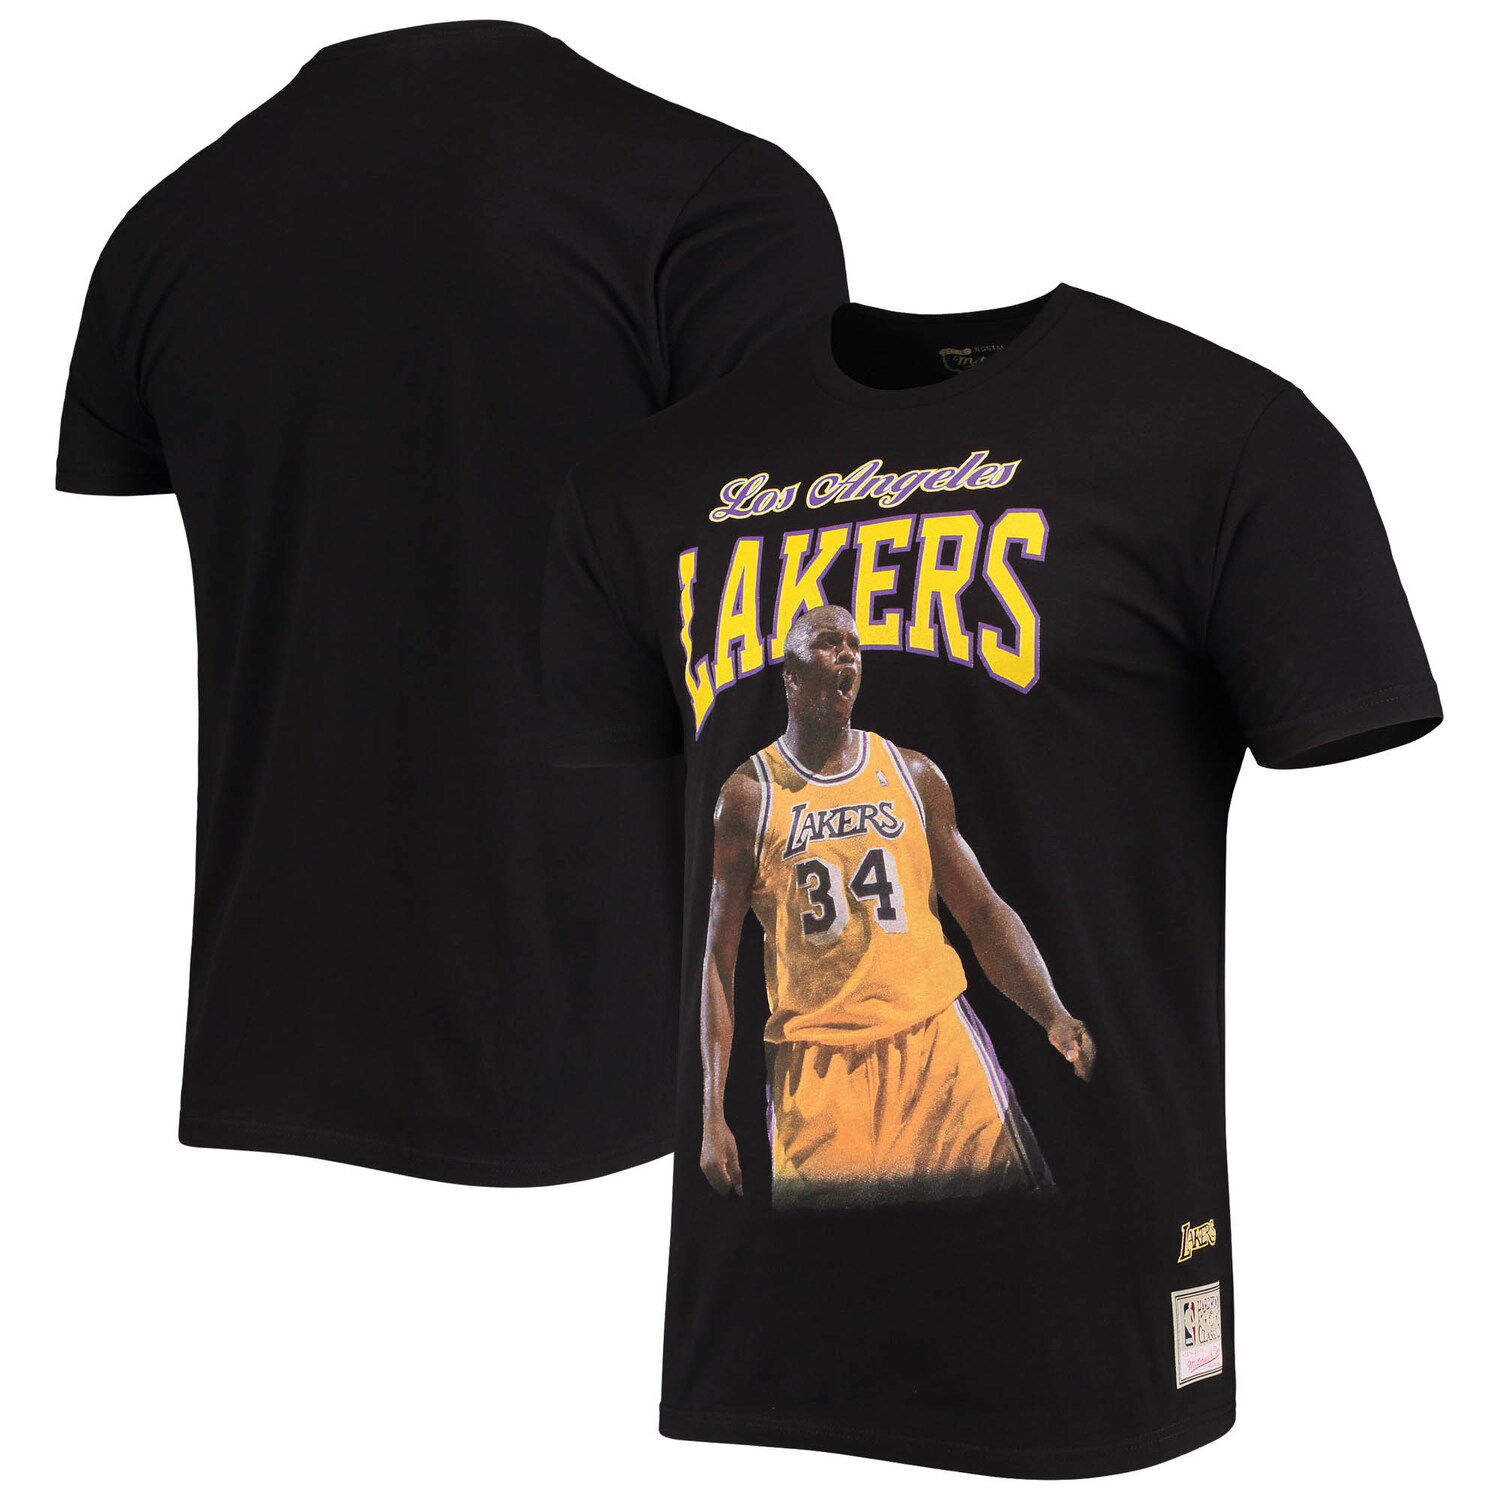 Image for Unbranded Men's Mitchell & Ness Shaquille O'Neal Black Los Angeles Lakers Hardwood Classics Courtside Player T-Shirt at Kohl's.